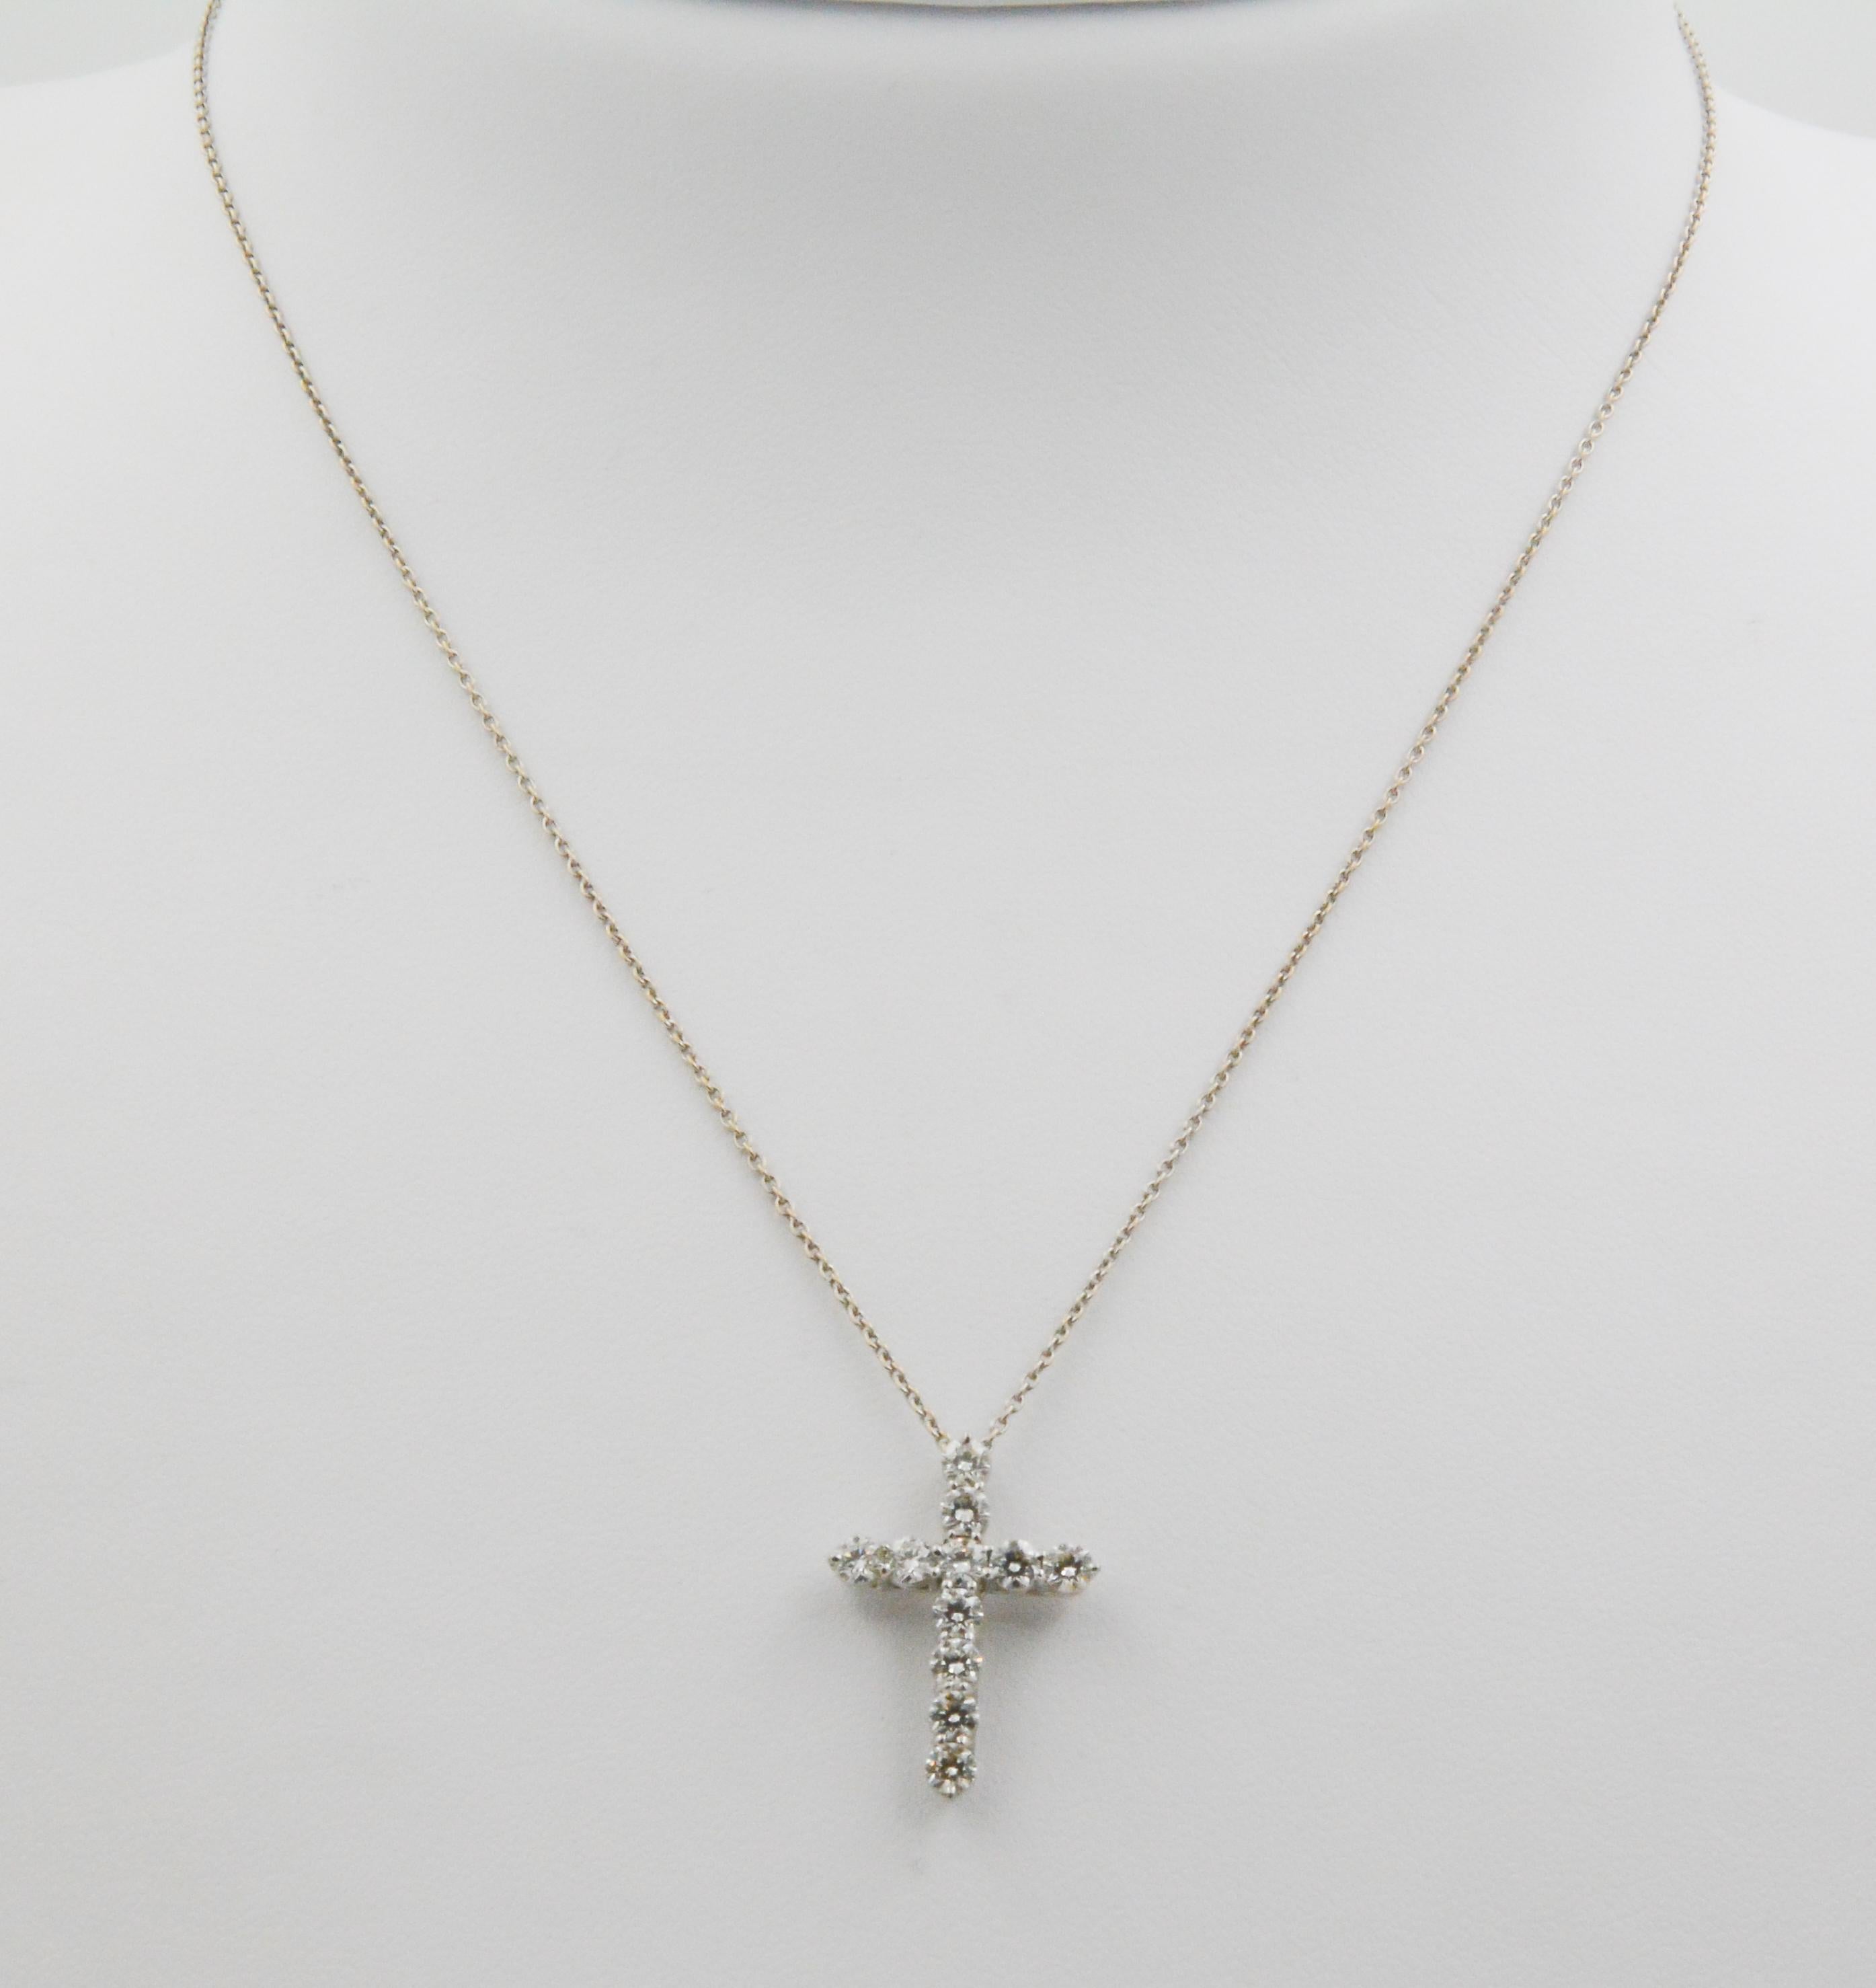 In the shape of a cross, this 18k white gold and diamond pendant features 11 round brilliant cut diamonds with F-G coloring and VS clarity, weighing a total 1.00 carats. The diamonds are set in a shared prongs on a 16” fine chain with a lobster claw